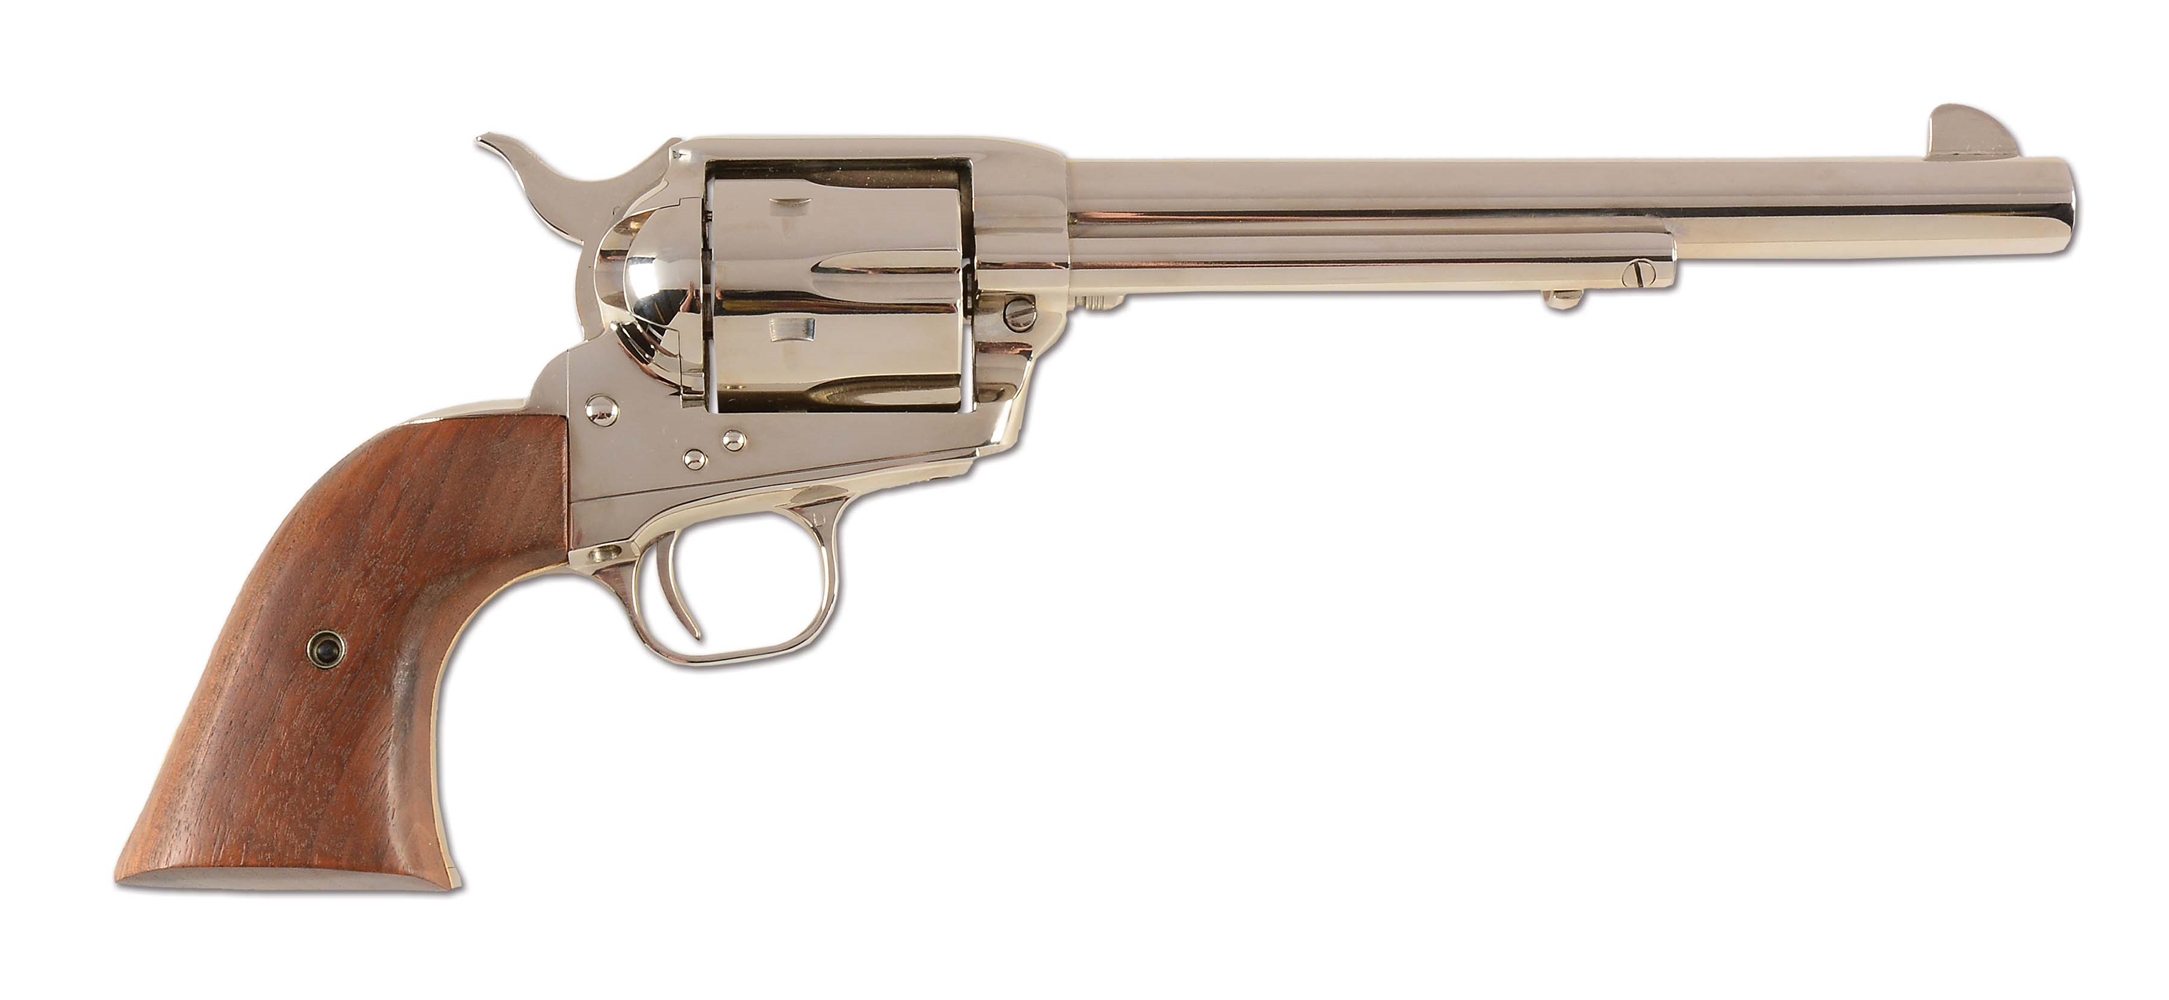 (M) BOXED COLT NICKEL PLATED 3RD GENERATION SINGLE ACTION ARMY REVOLVER (1979).